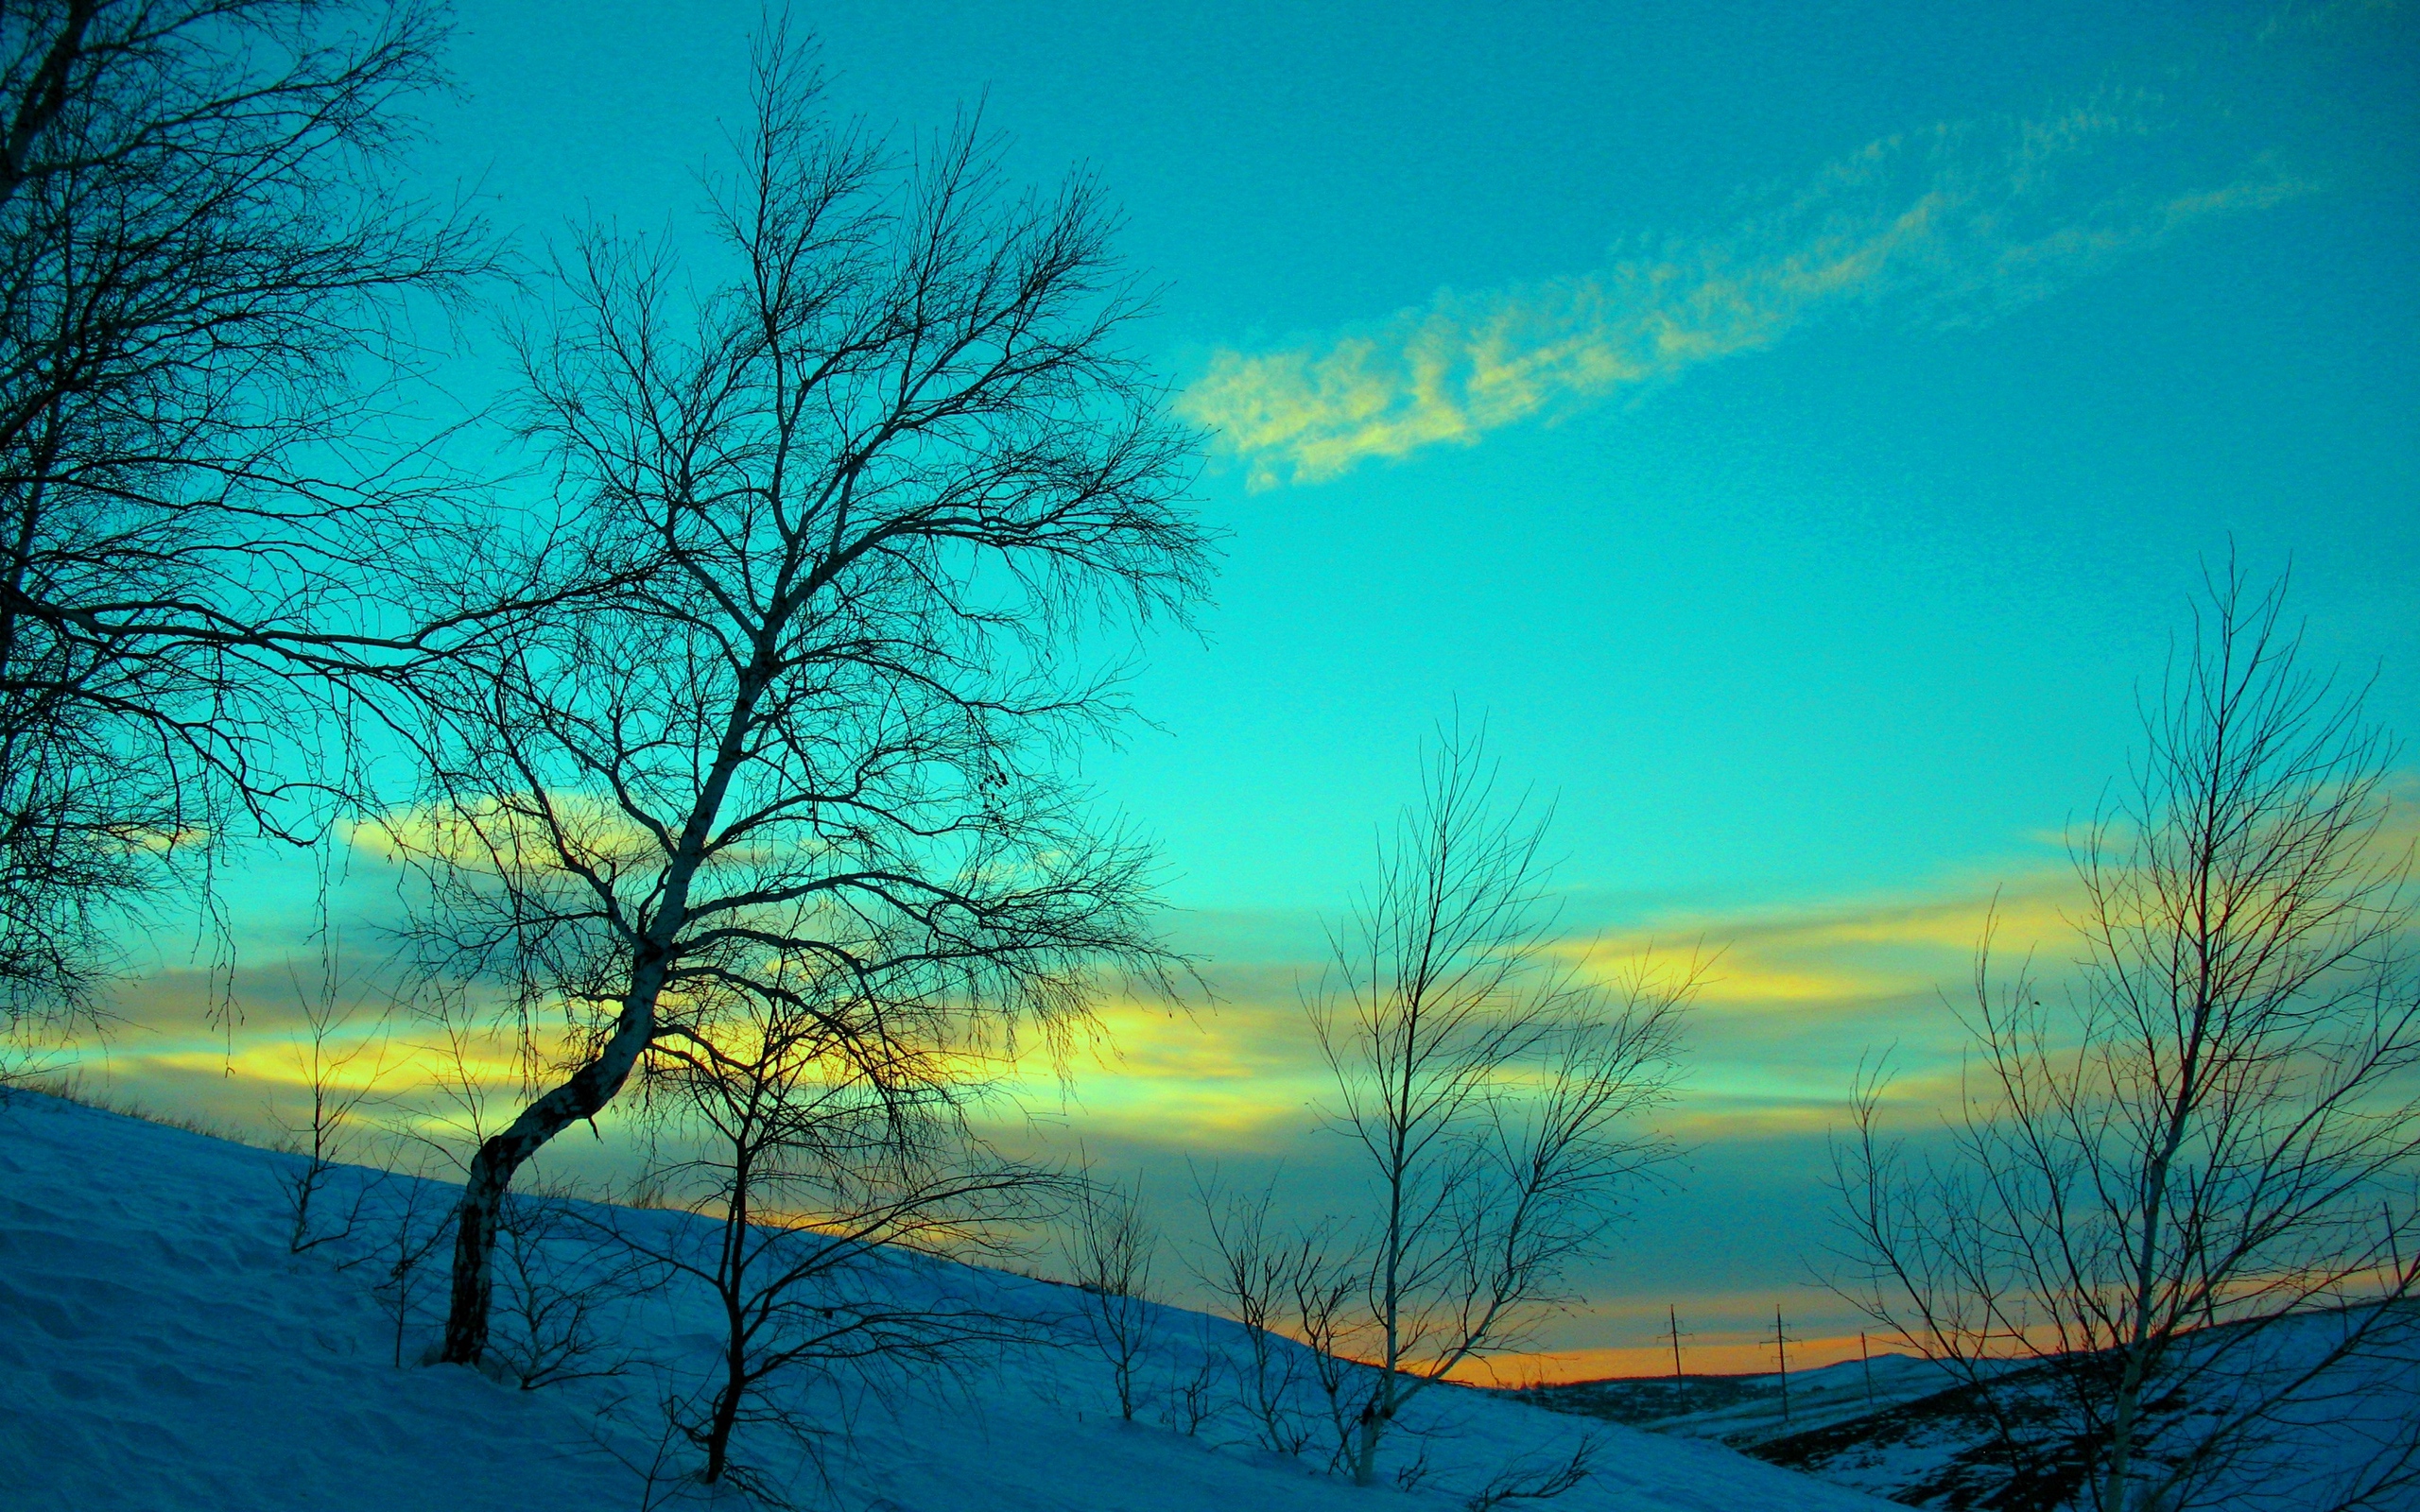 Download wallpaper 2560x1600 march, winter, snow, frost, nature ...